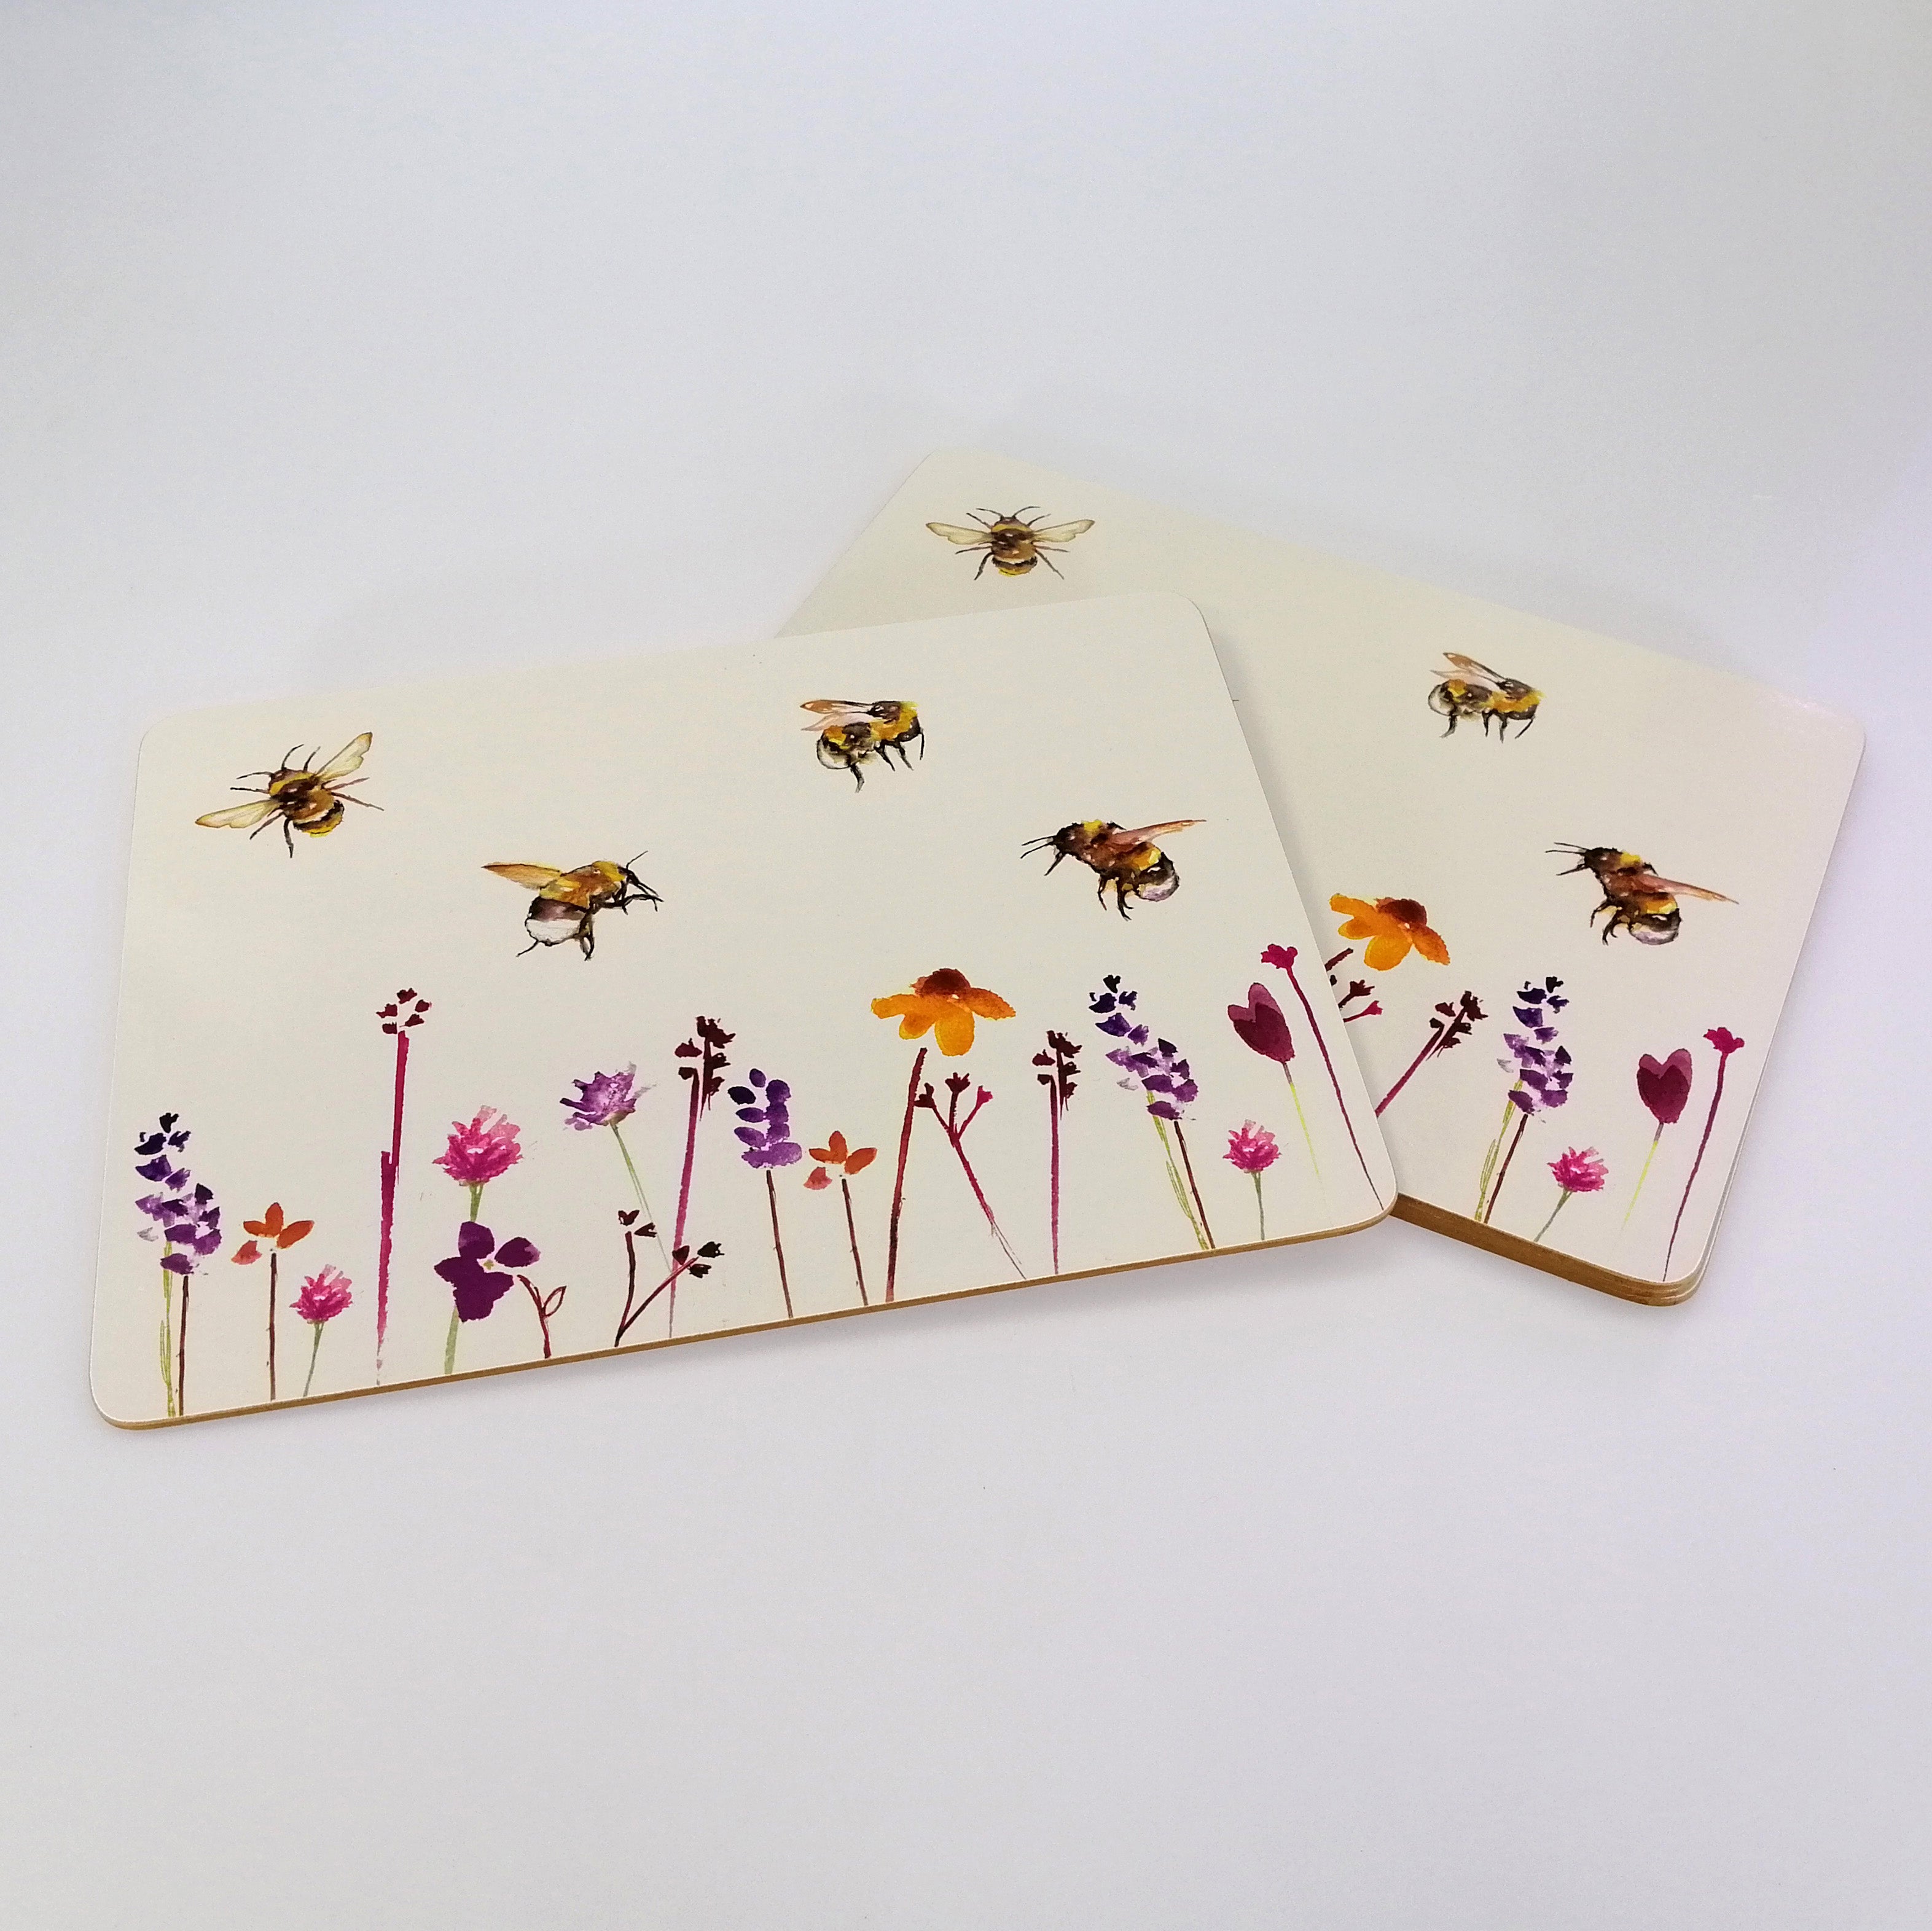 Busy Bees Placemats - Set of 4